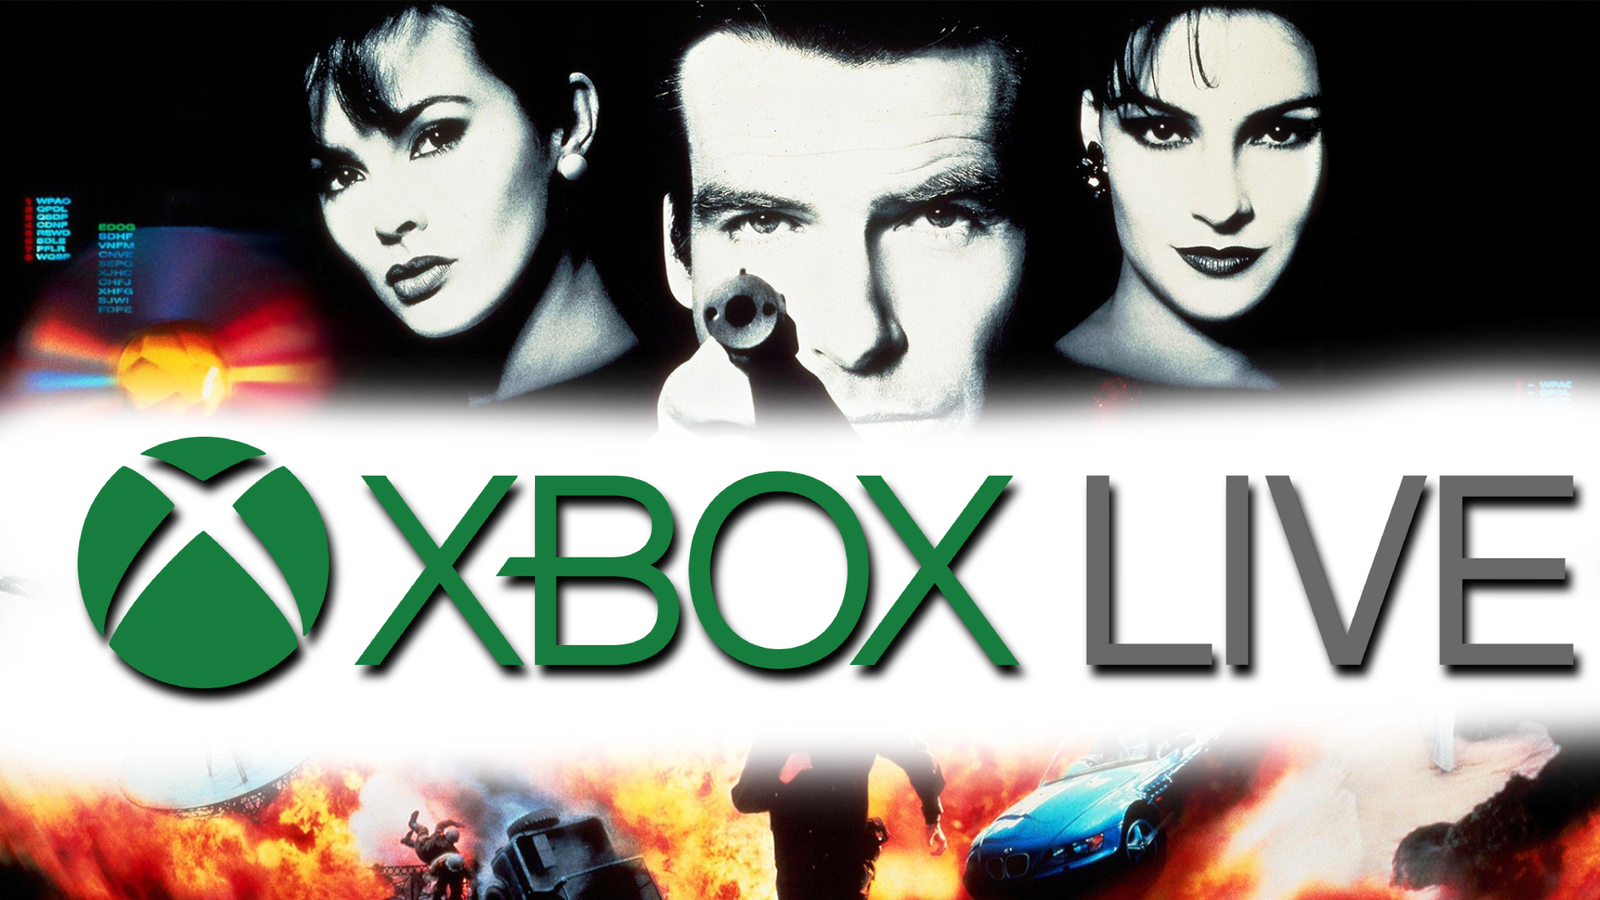 Goldeneye on Xbox Game Pass is a bitter disappointment